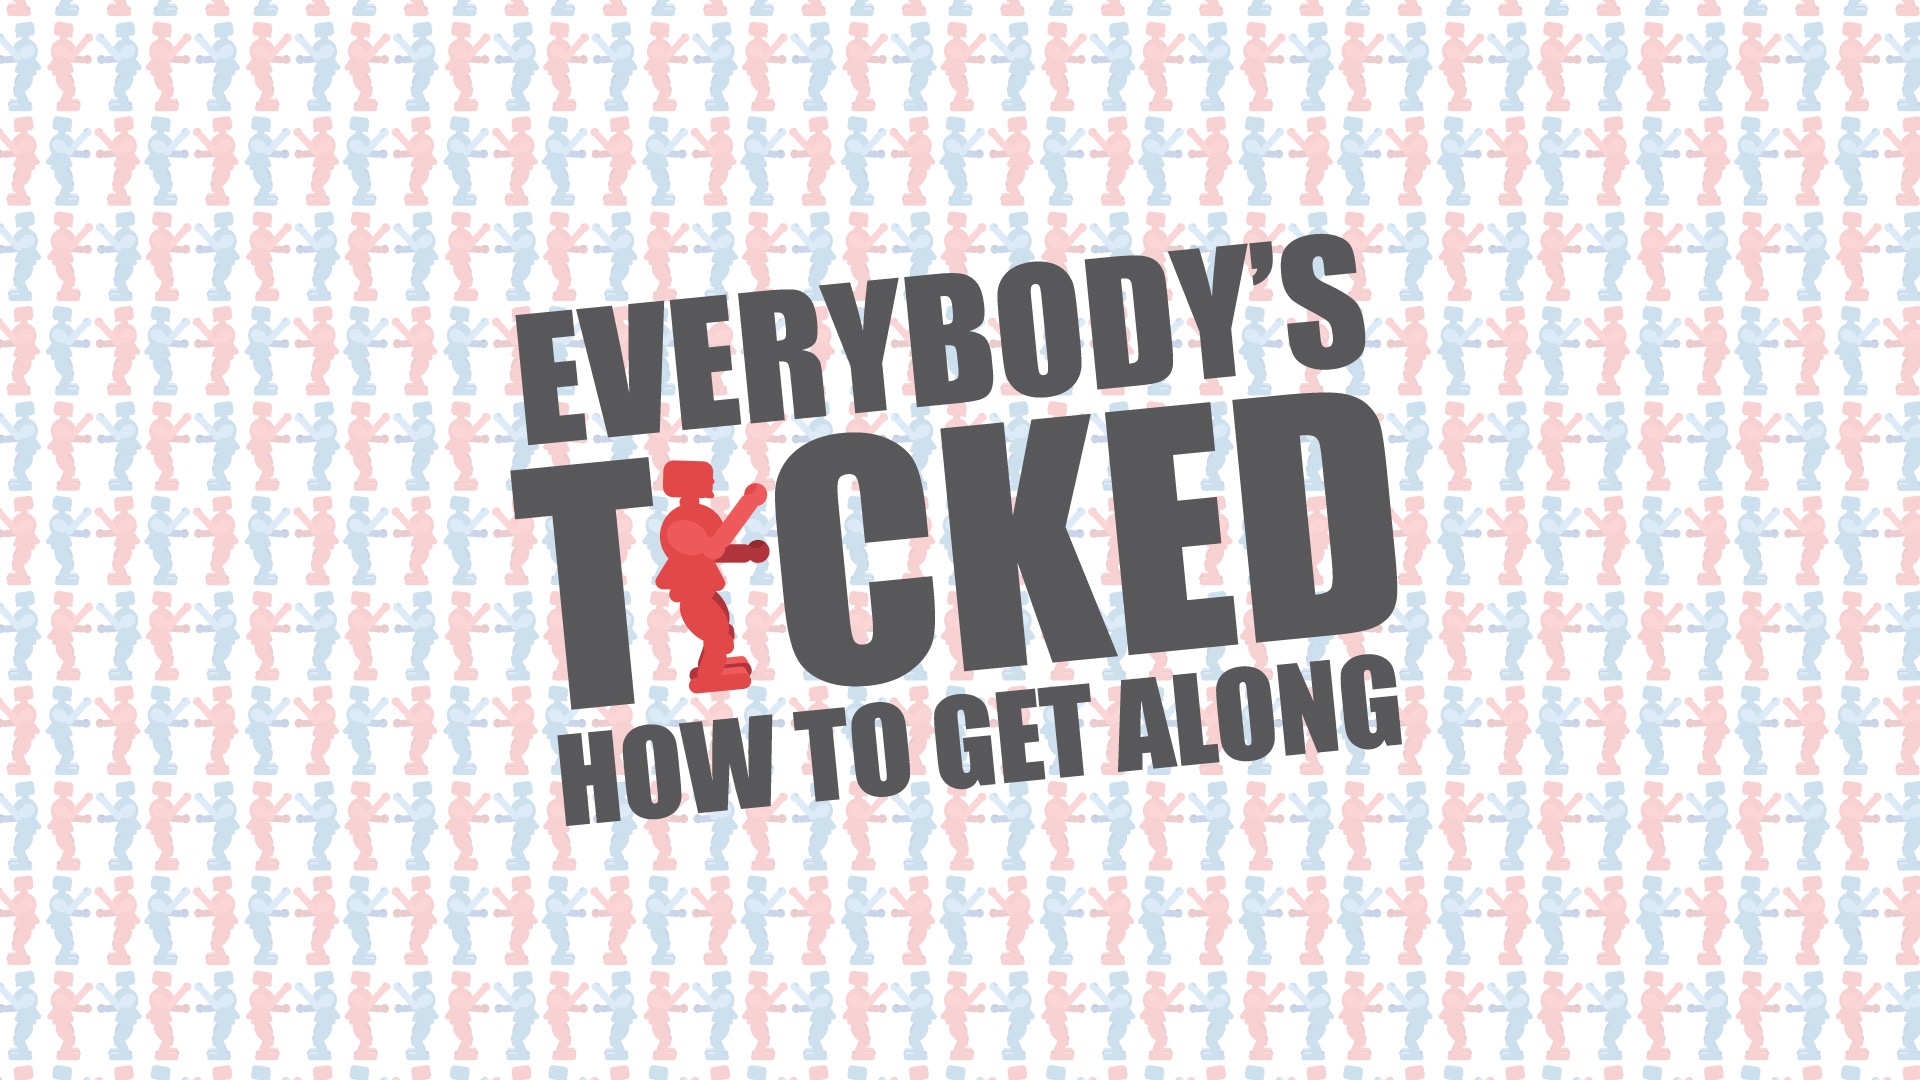 Everybody's Ticked: How To Get Along - Part VI